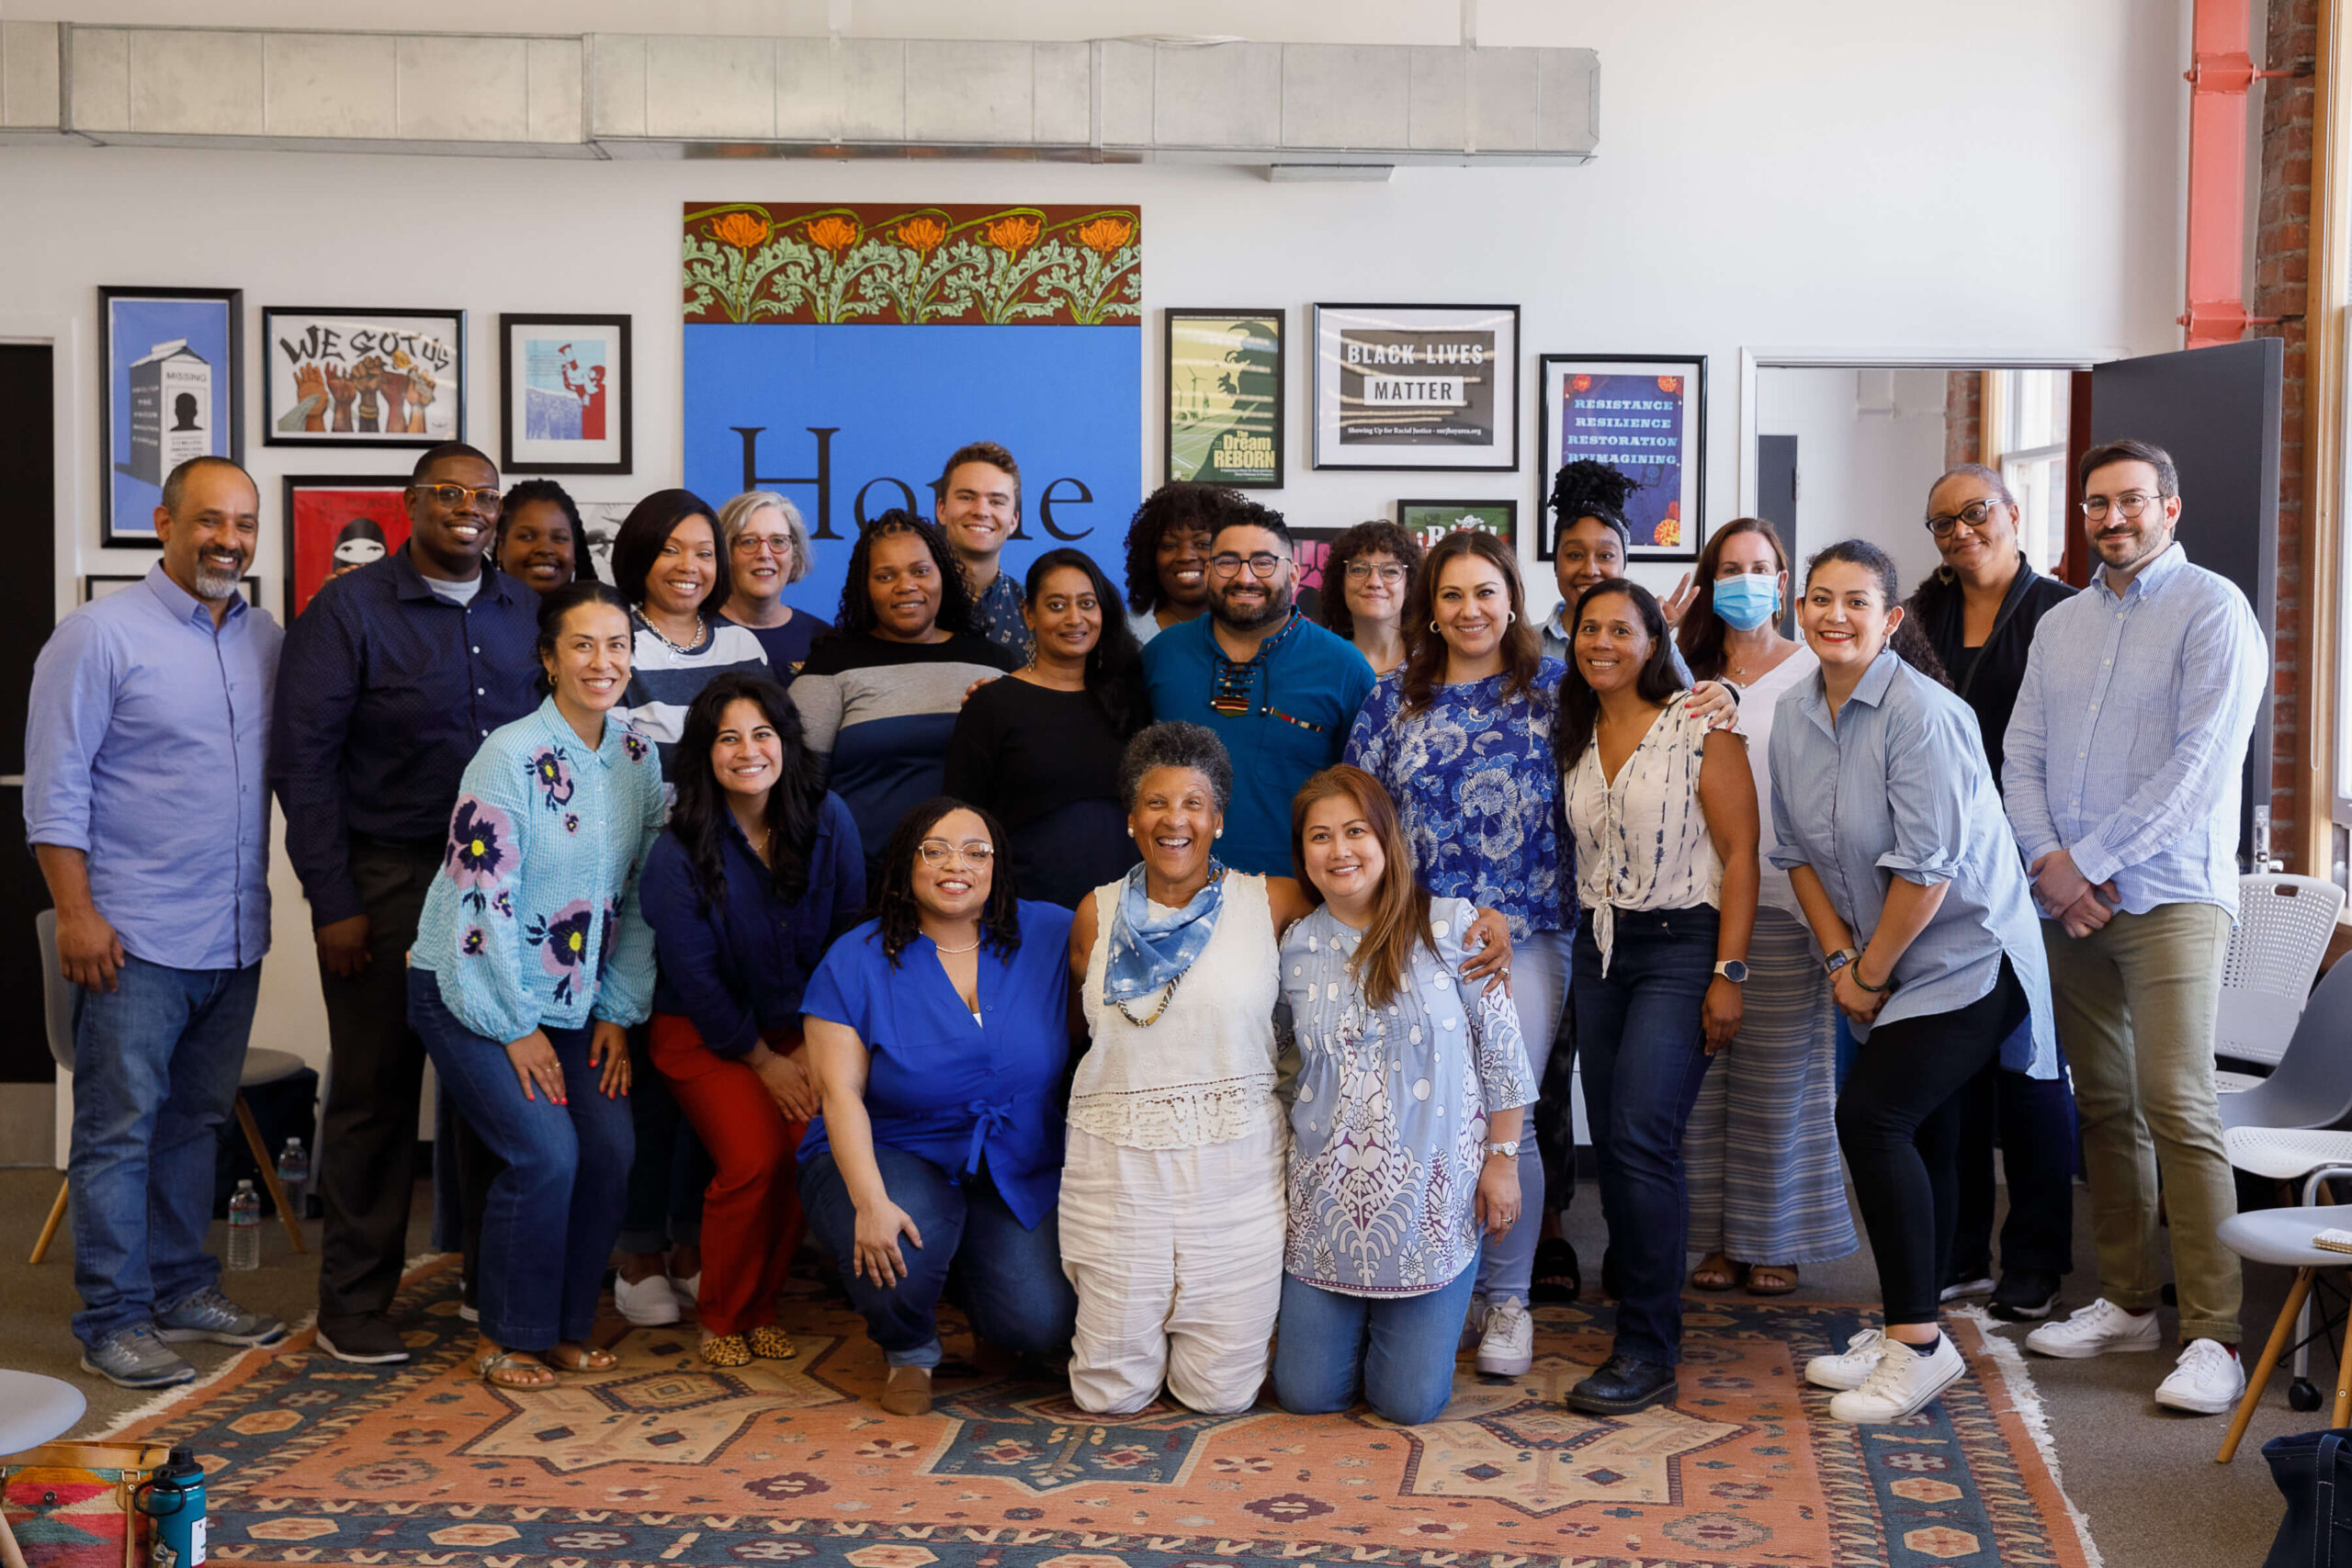 Twenty three people wearing blue shirts smile for a group photo in three separate rows. A wall full of framed posters and activist art is behind them.